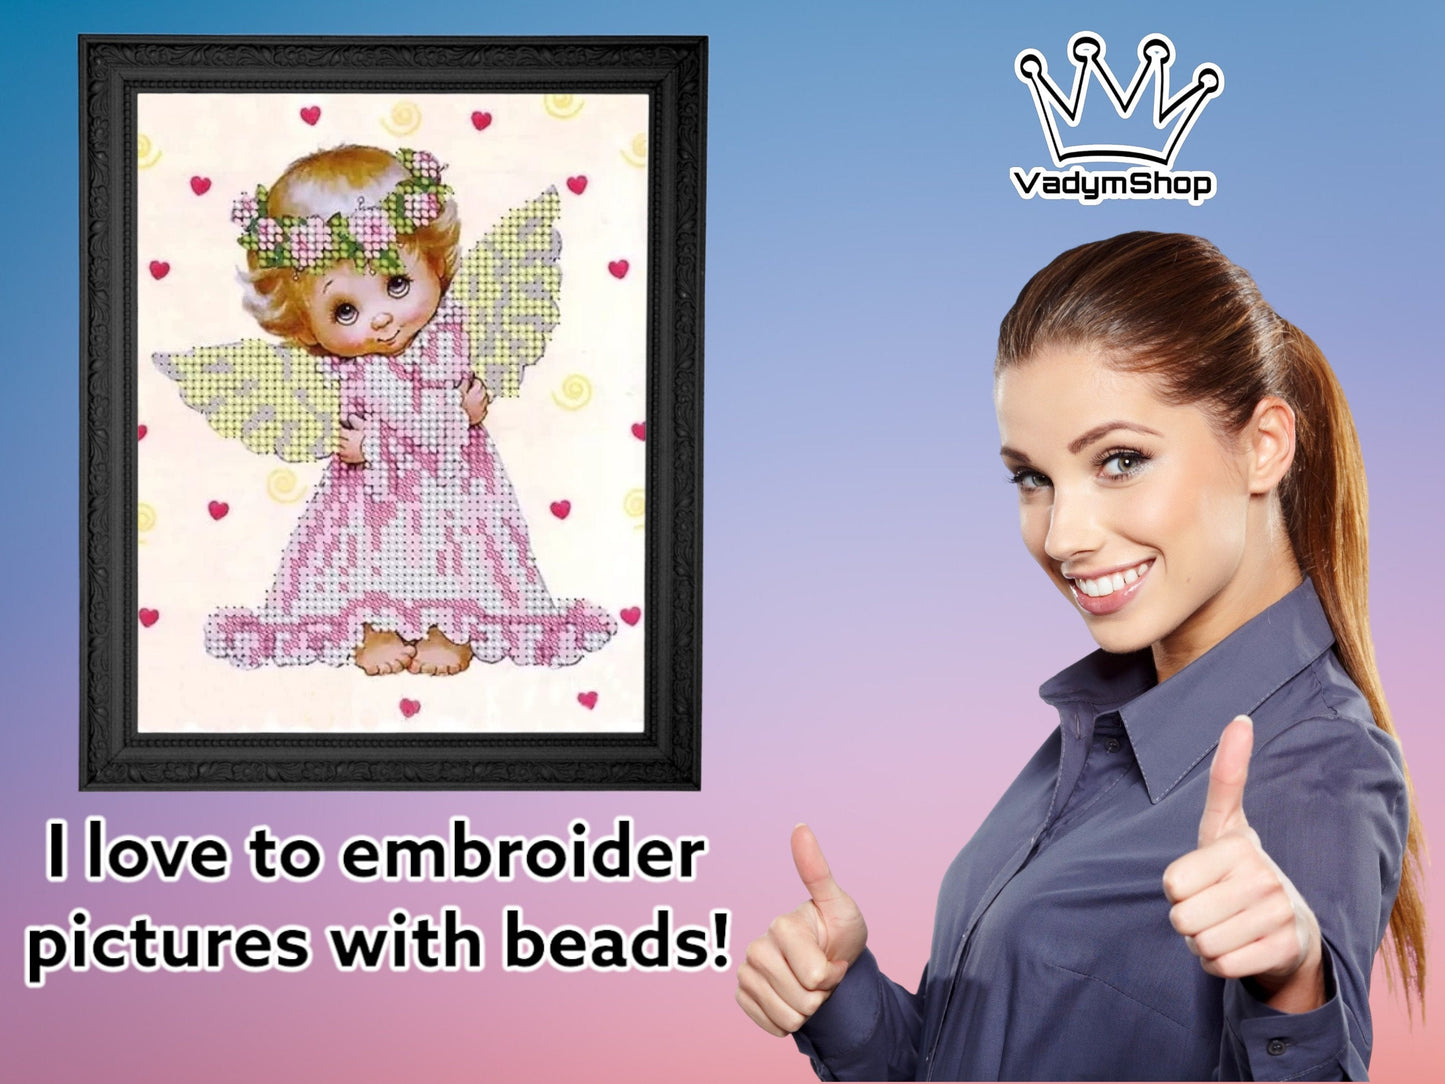 Small Bead embroidery kit "Angel of love". Size: 5.5-6.7 in (14-17cm) - VadymShop